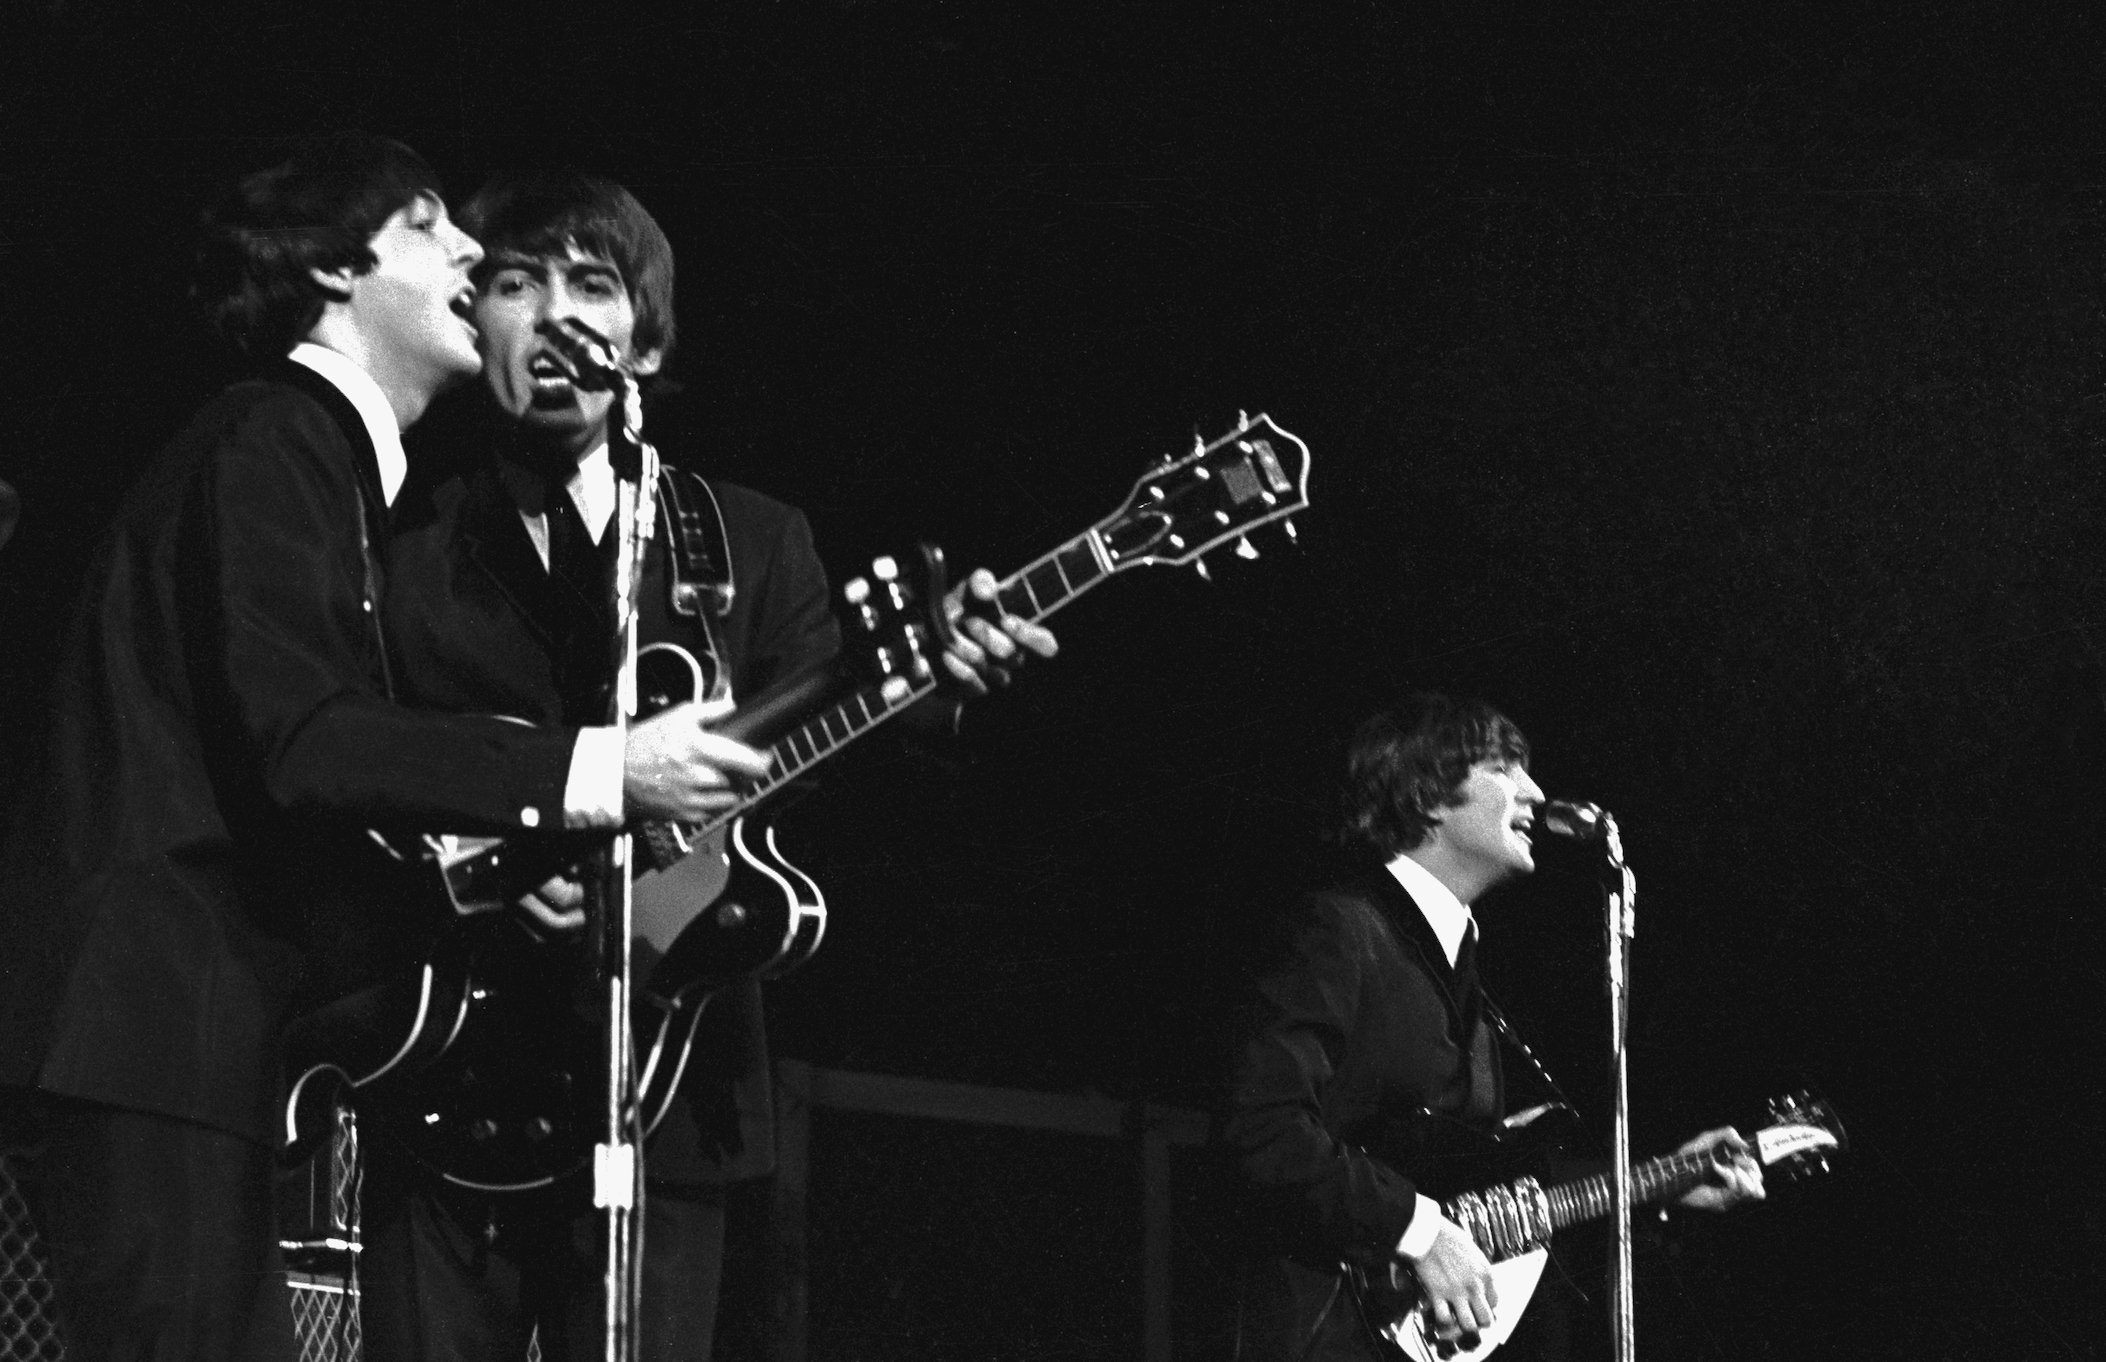 Paul McCartney, George Harrison, and John Lennon of The Beatles perform at a concert in America